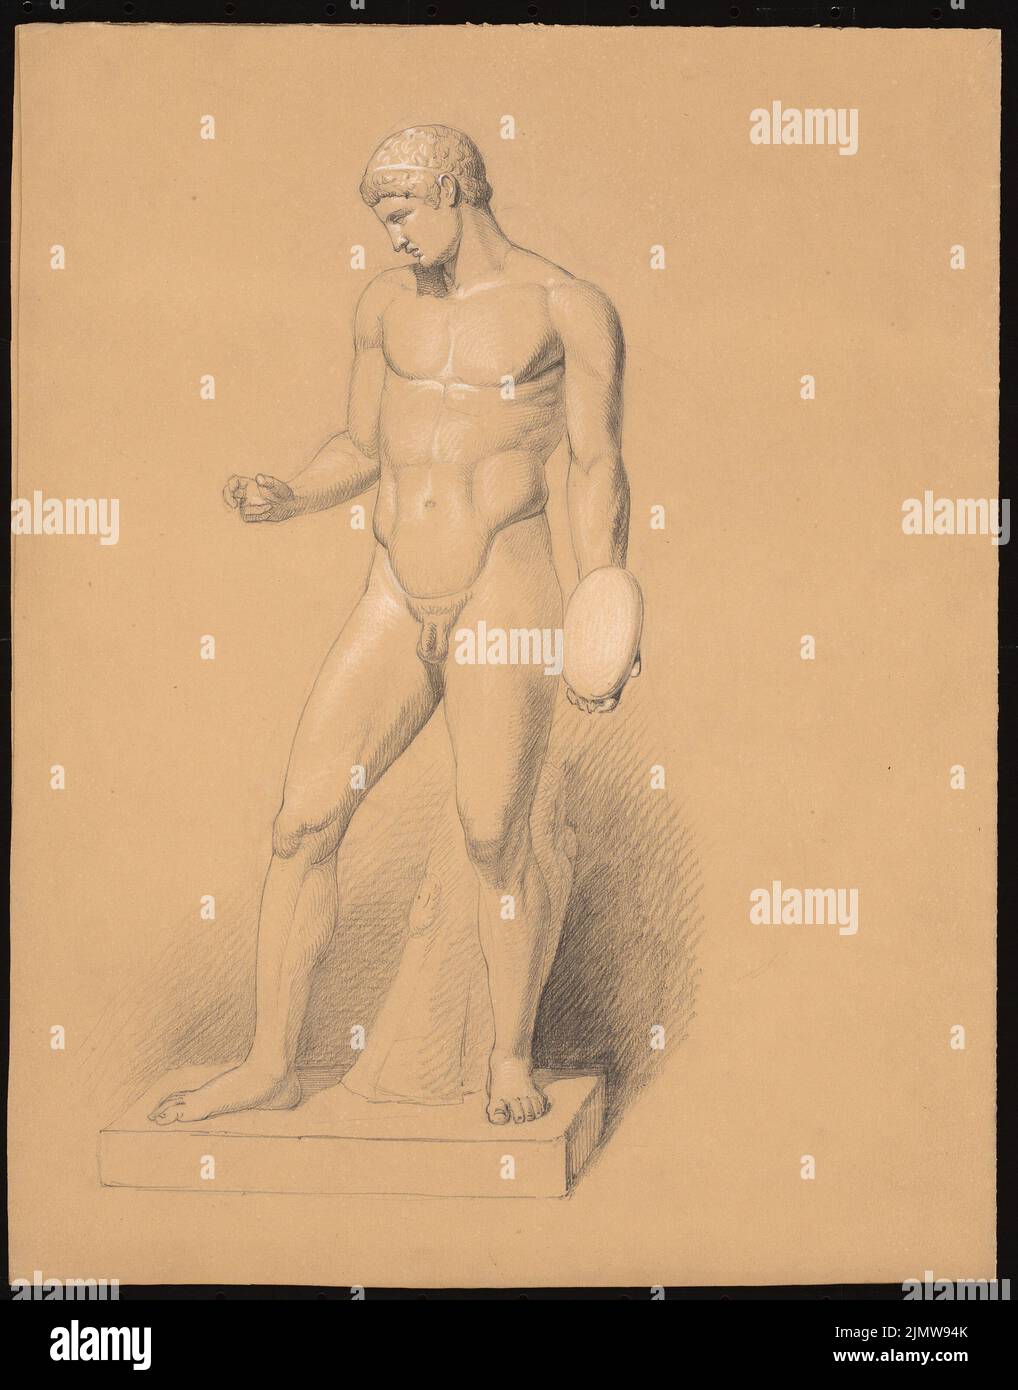 Knoblauch Gustav (1833-1916), male act, standing (without dat.): View. Pencil, heighted on paper, 31 x 24.3 cm (including scan edges) Knoblauch Gustav  (1833-1916): Männlicher Akt, stehend Stock Photo